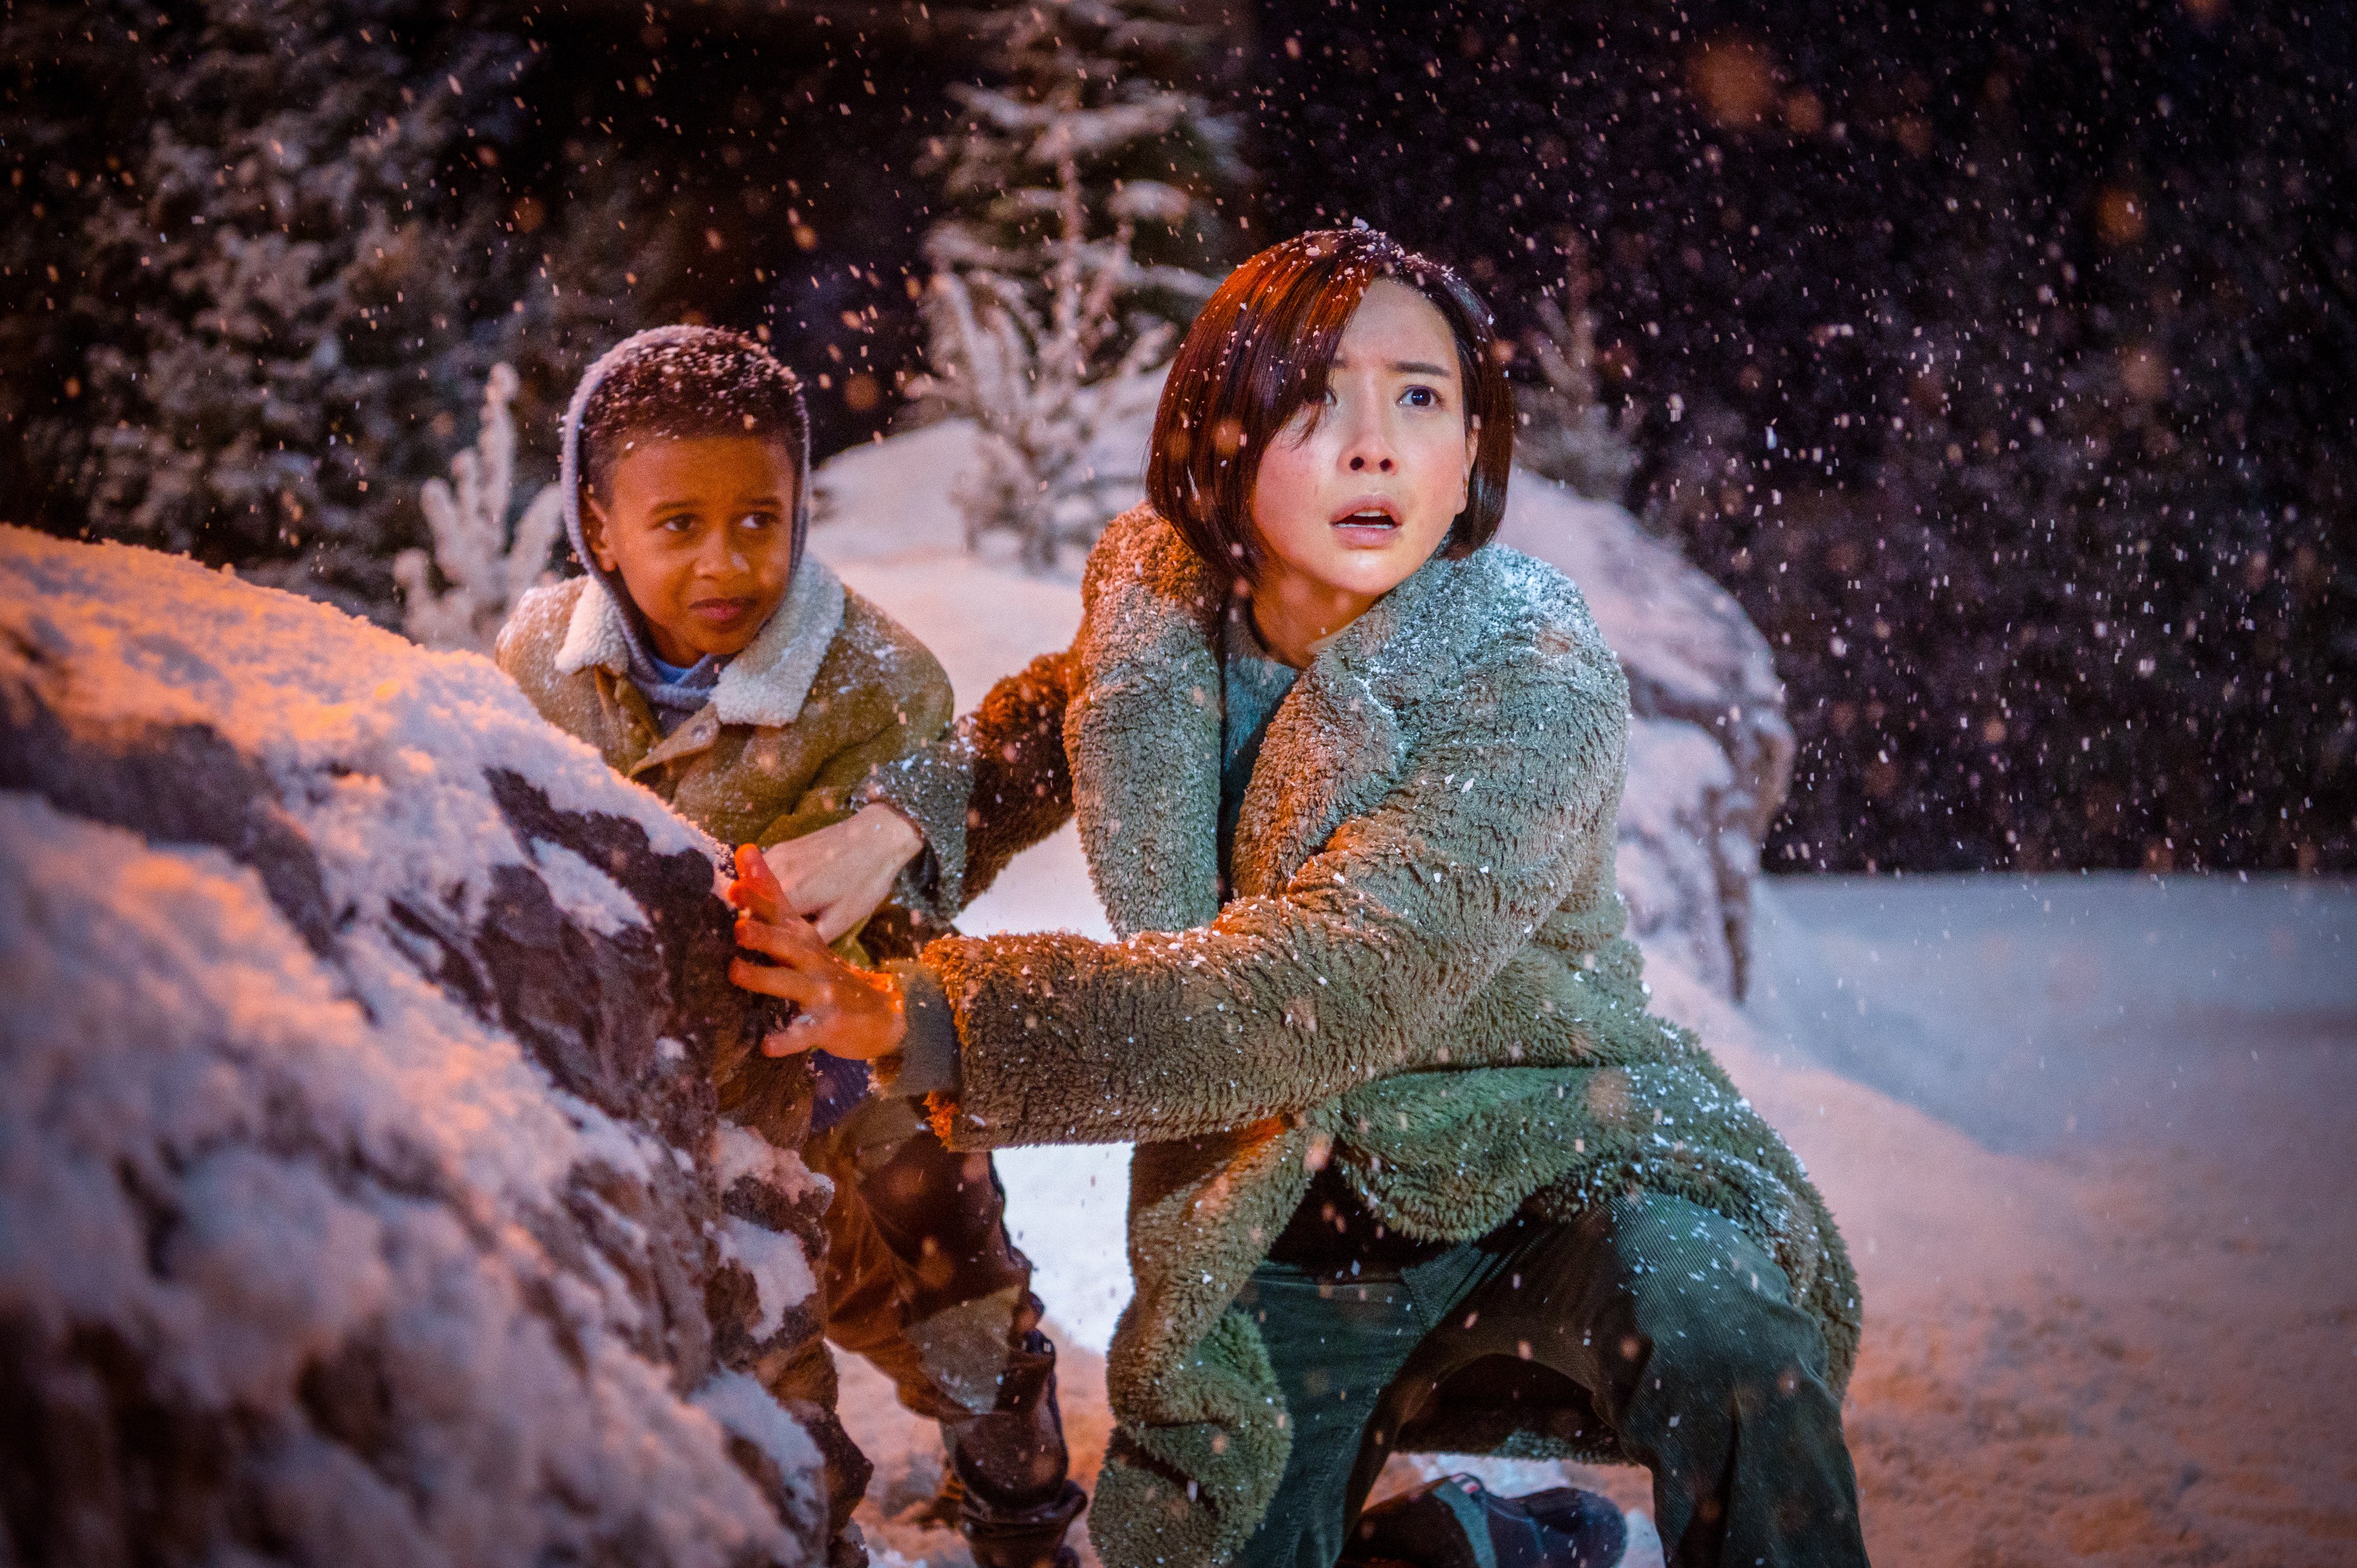 Kelly Yu (right) and Zayn Maloney in a still from Moonfall. Photo: Reiner Bajo/Lionsgate.